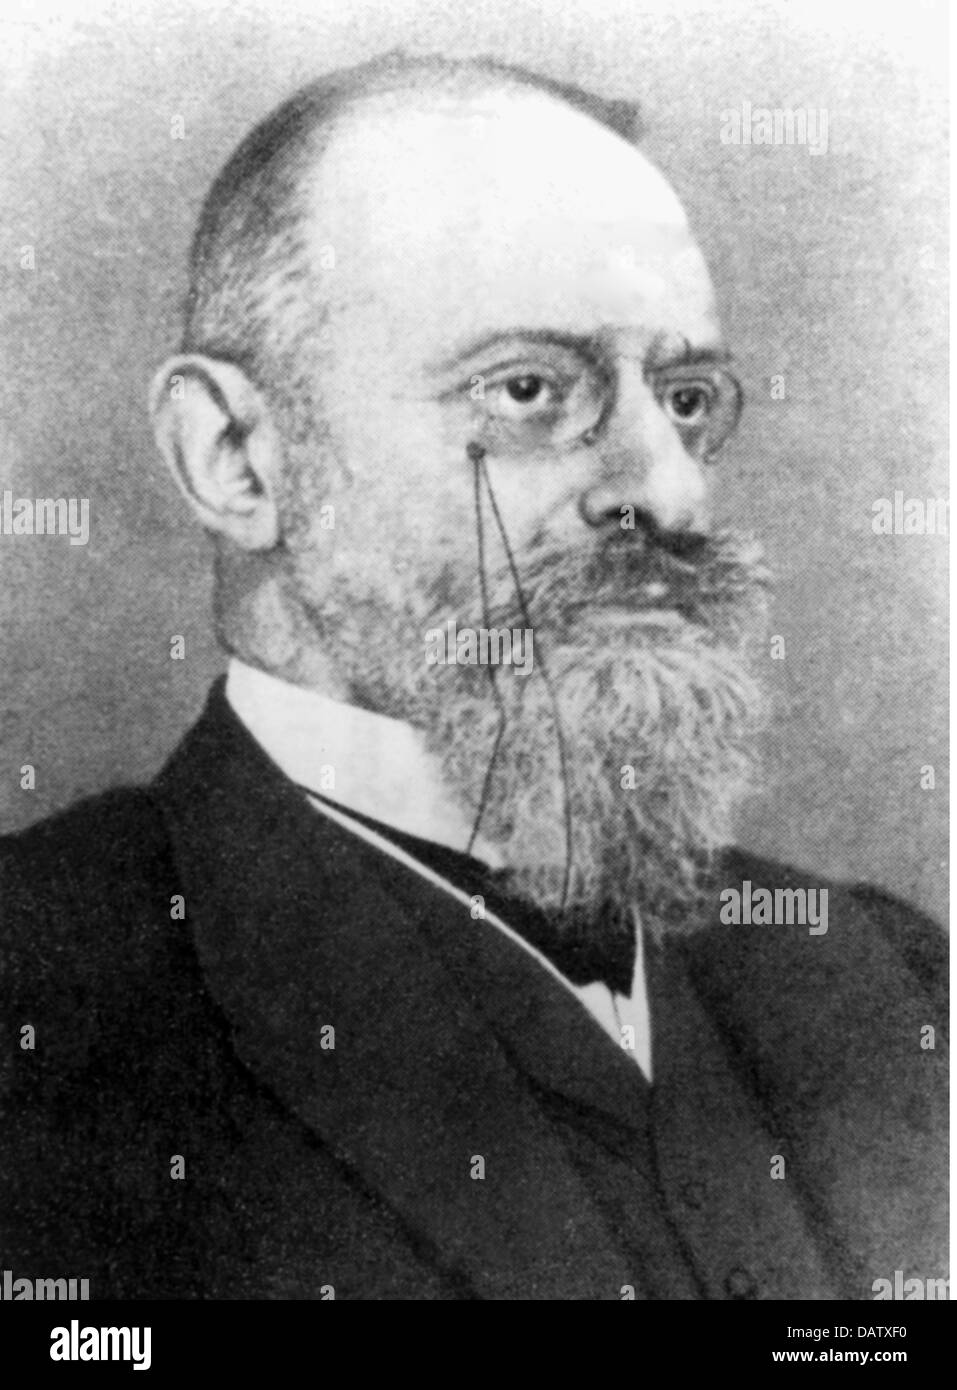 Neisser, Albert, 22.1.1855 - 30.7.1916, German physician (dermatologist), discovered the exciter of the gonorrhea (1879), portrait, circa 1910, Stock Photo